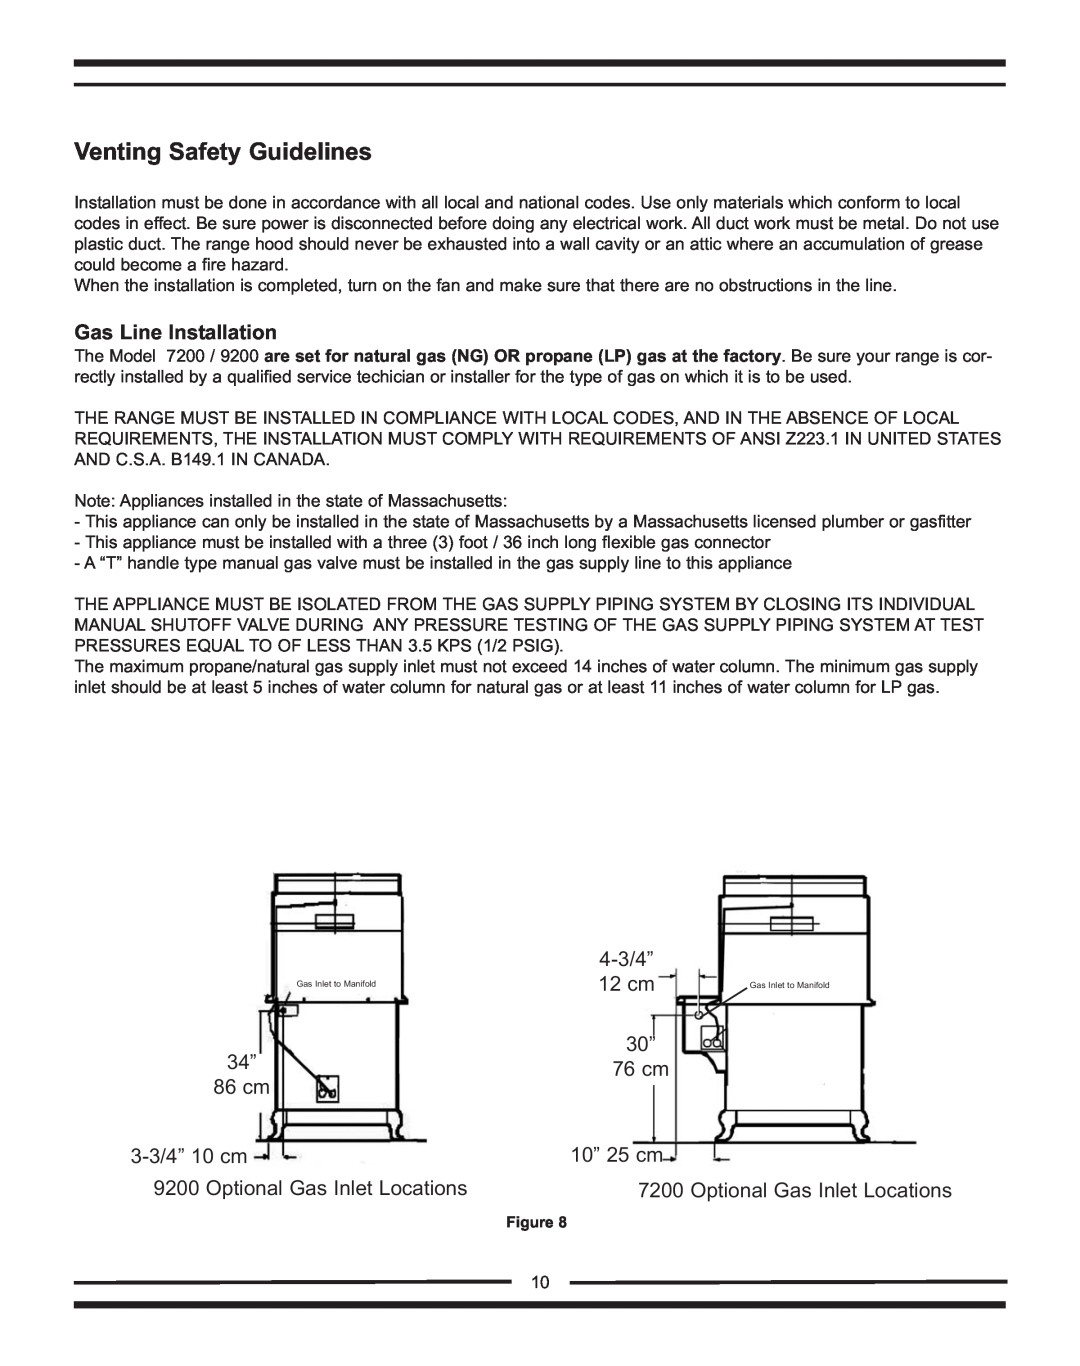 Heartland Bakeware 9200/7200 manual Venting Safety Guidelines, Gas Line Installation, 86 cm 